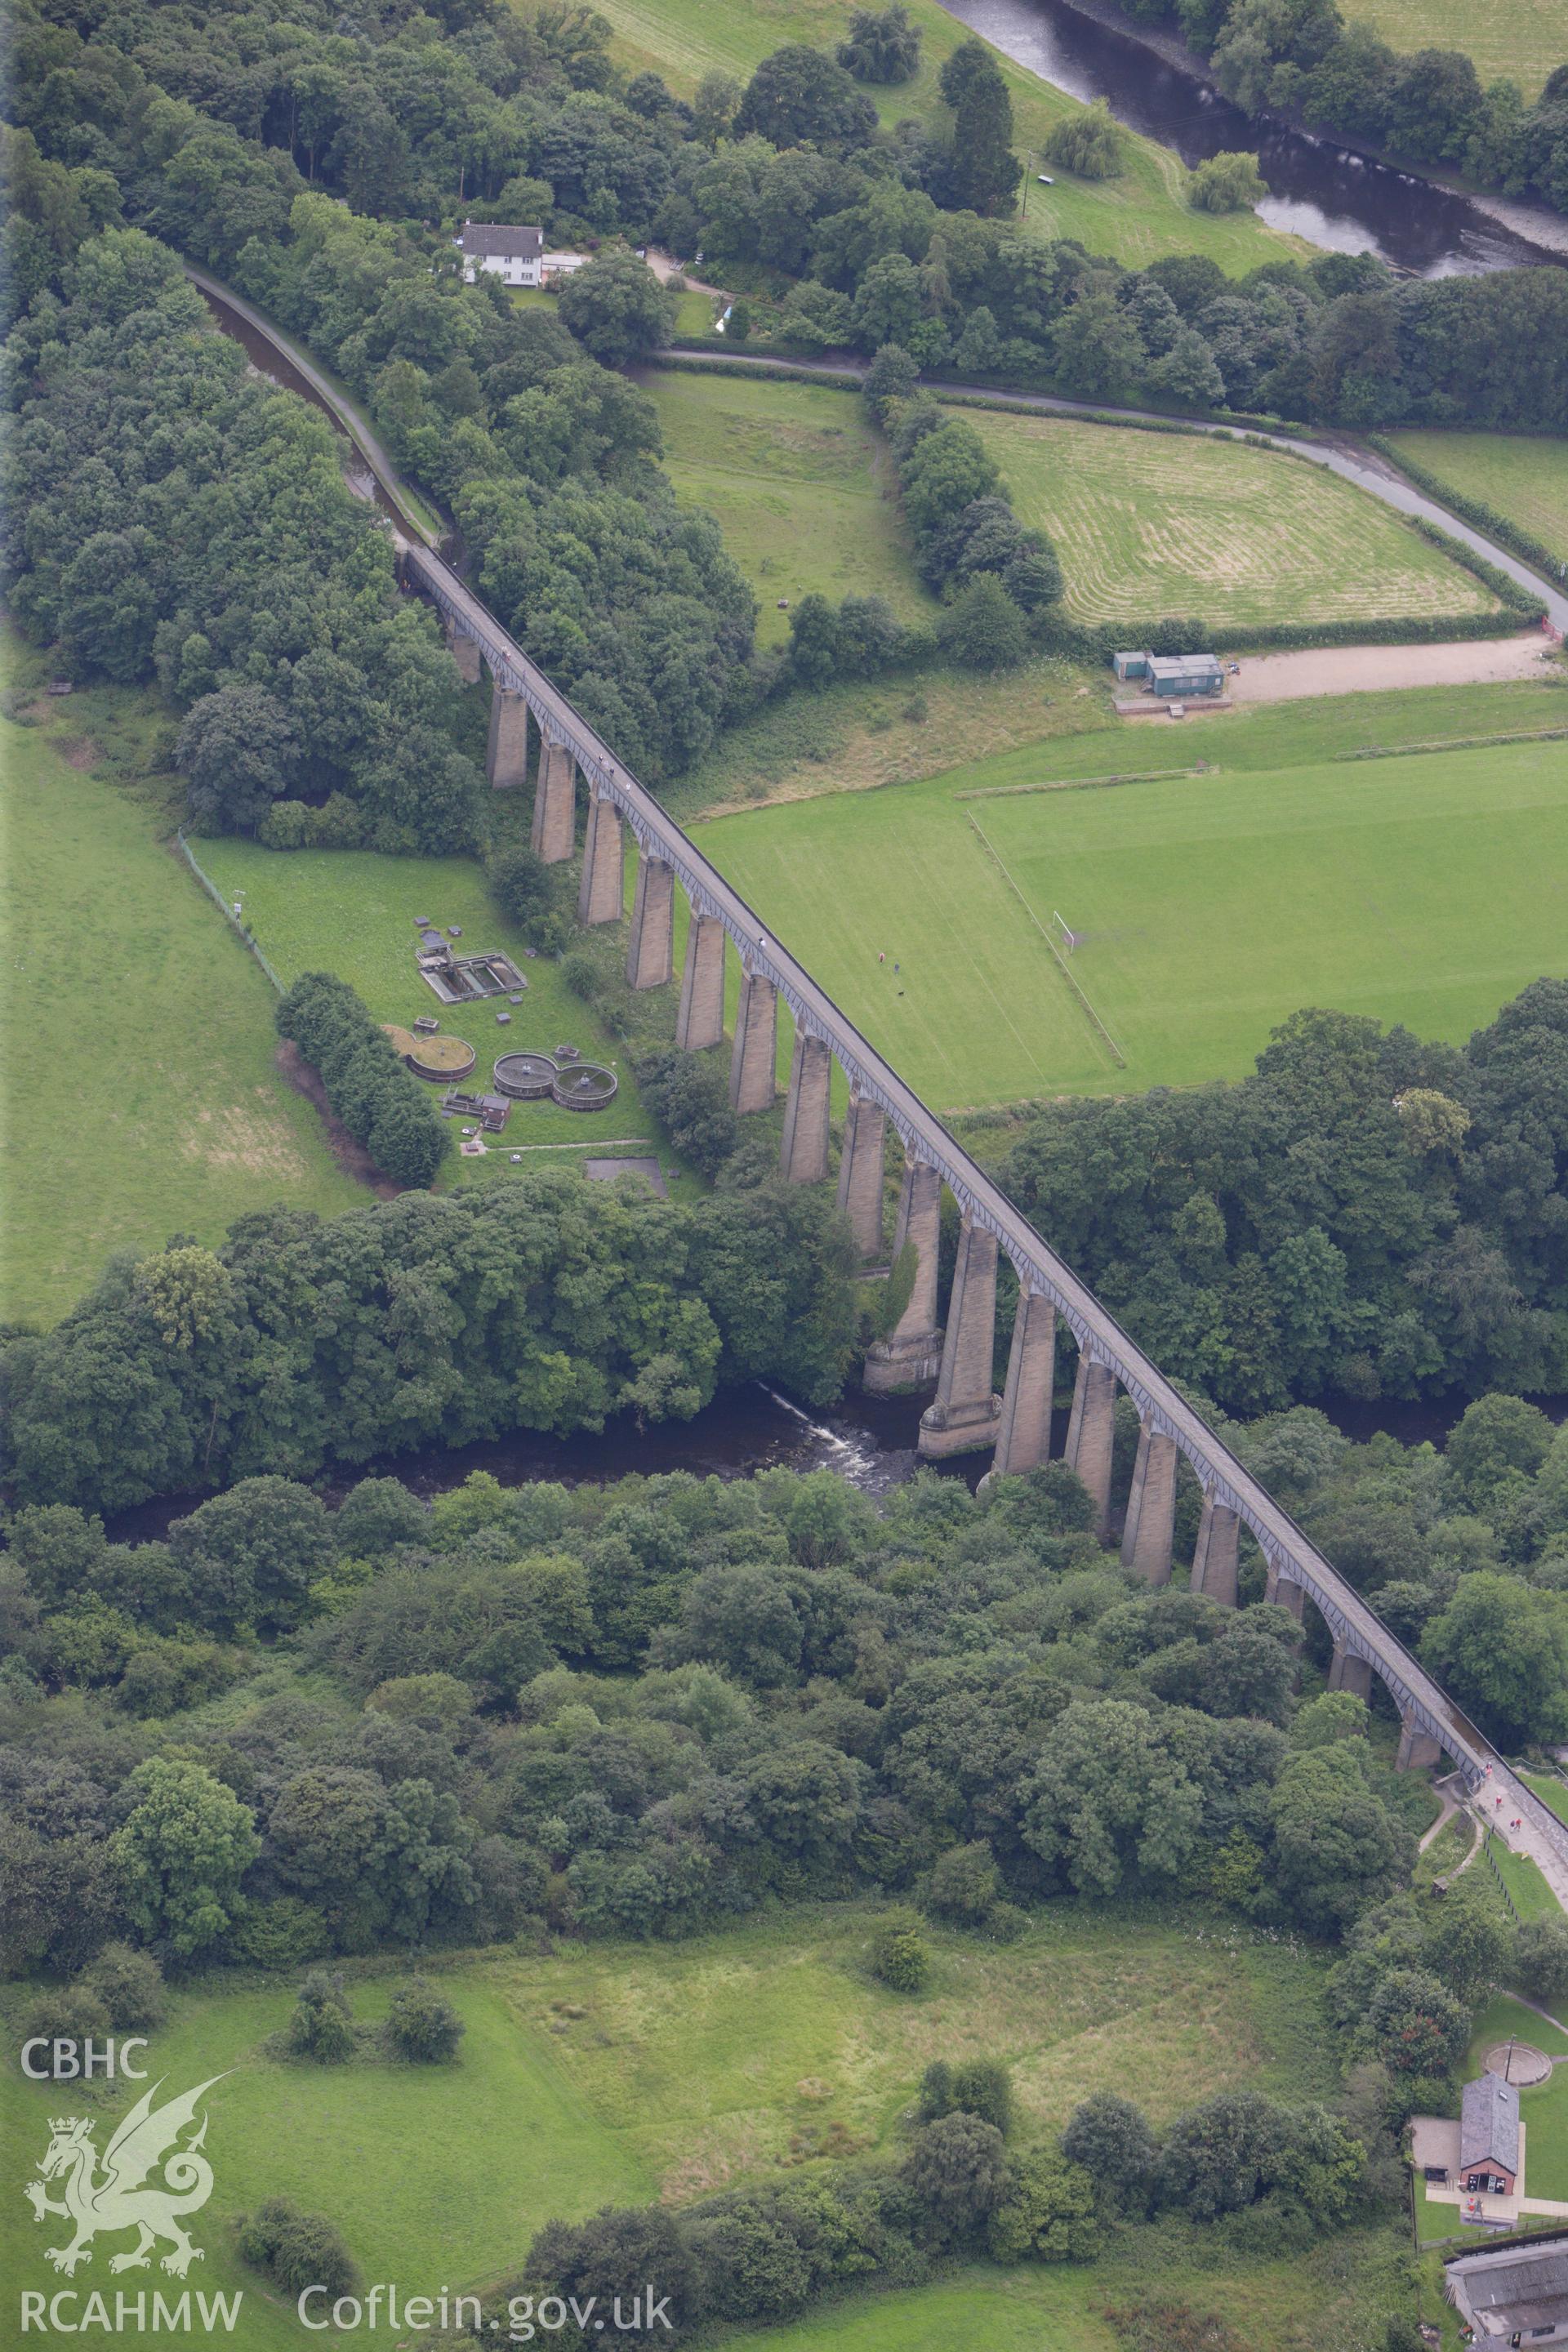 RCAHMW colour oblique aerial photograph of Pontcysyllte Aqueduct on the Ellesmere Canal. Taken on 08 July 2009 by Toby Driver